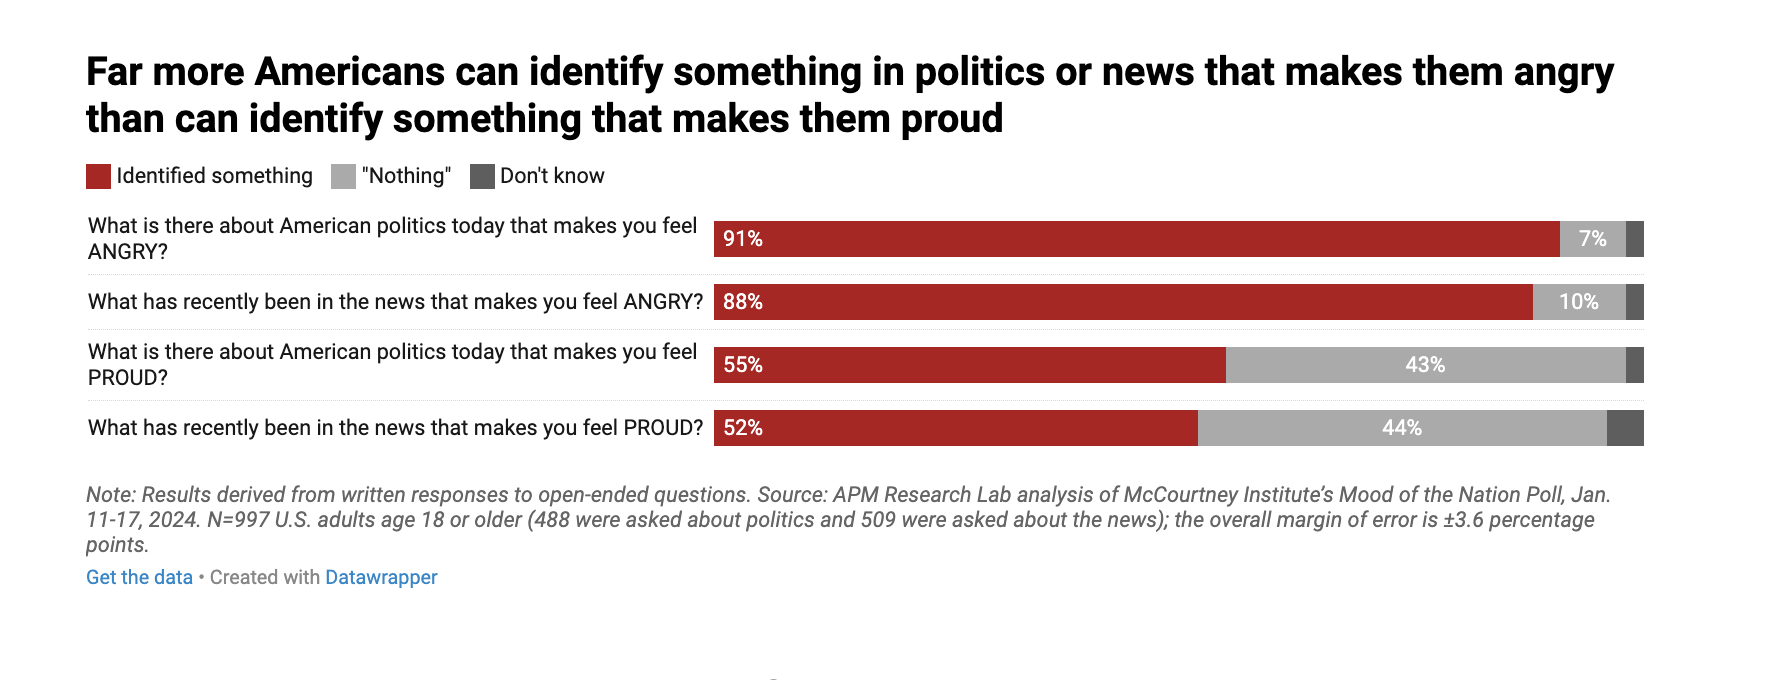 Graphic: Far more Americans can identify something in politics or news that makes them angry than can identify something that makes them proud